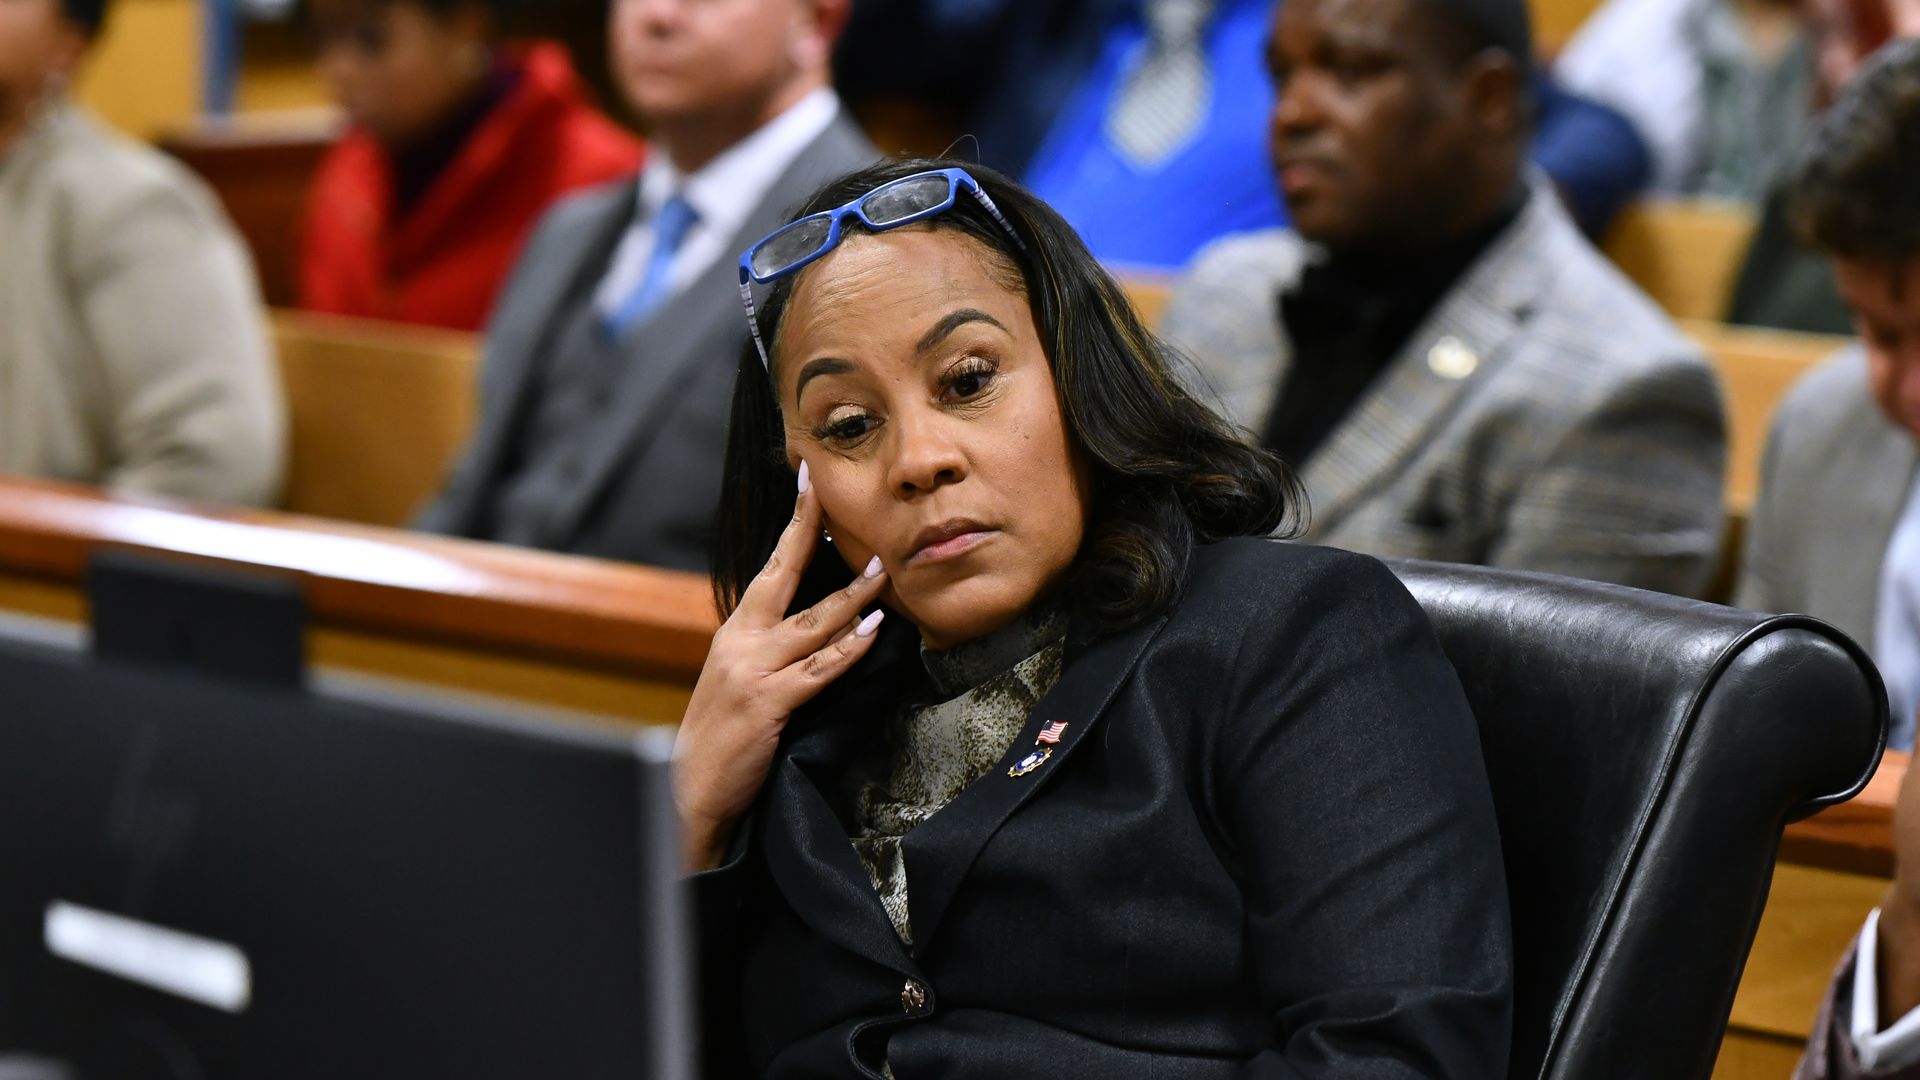 Fulton County District Attorney Fani Willis Photo: Dennis Byron-Pool/Getty Images